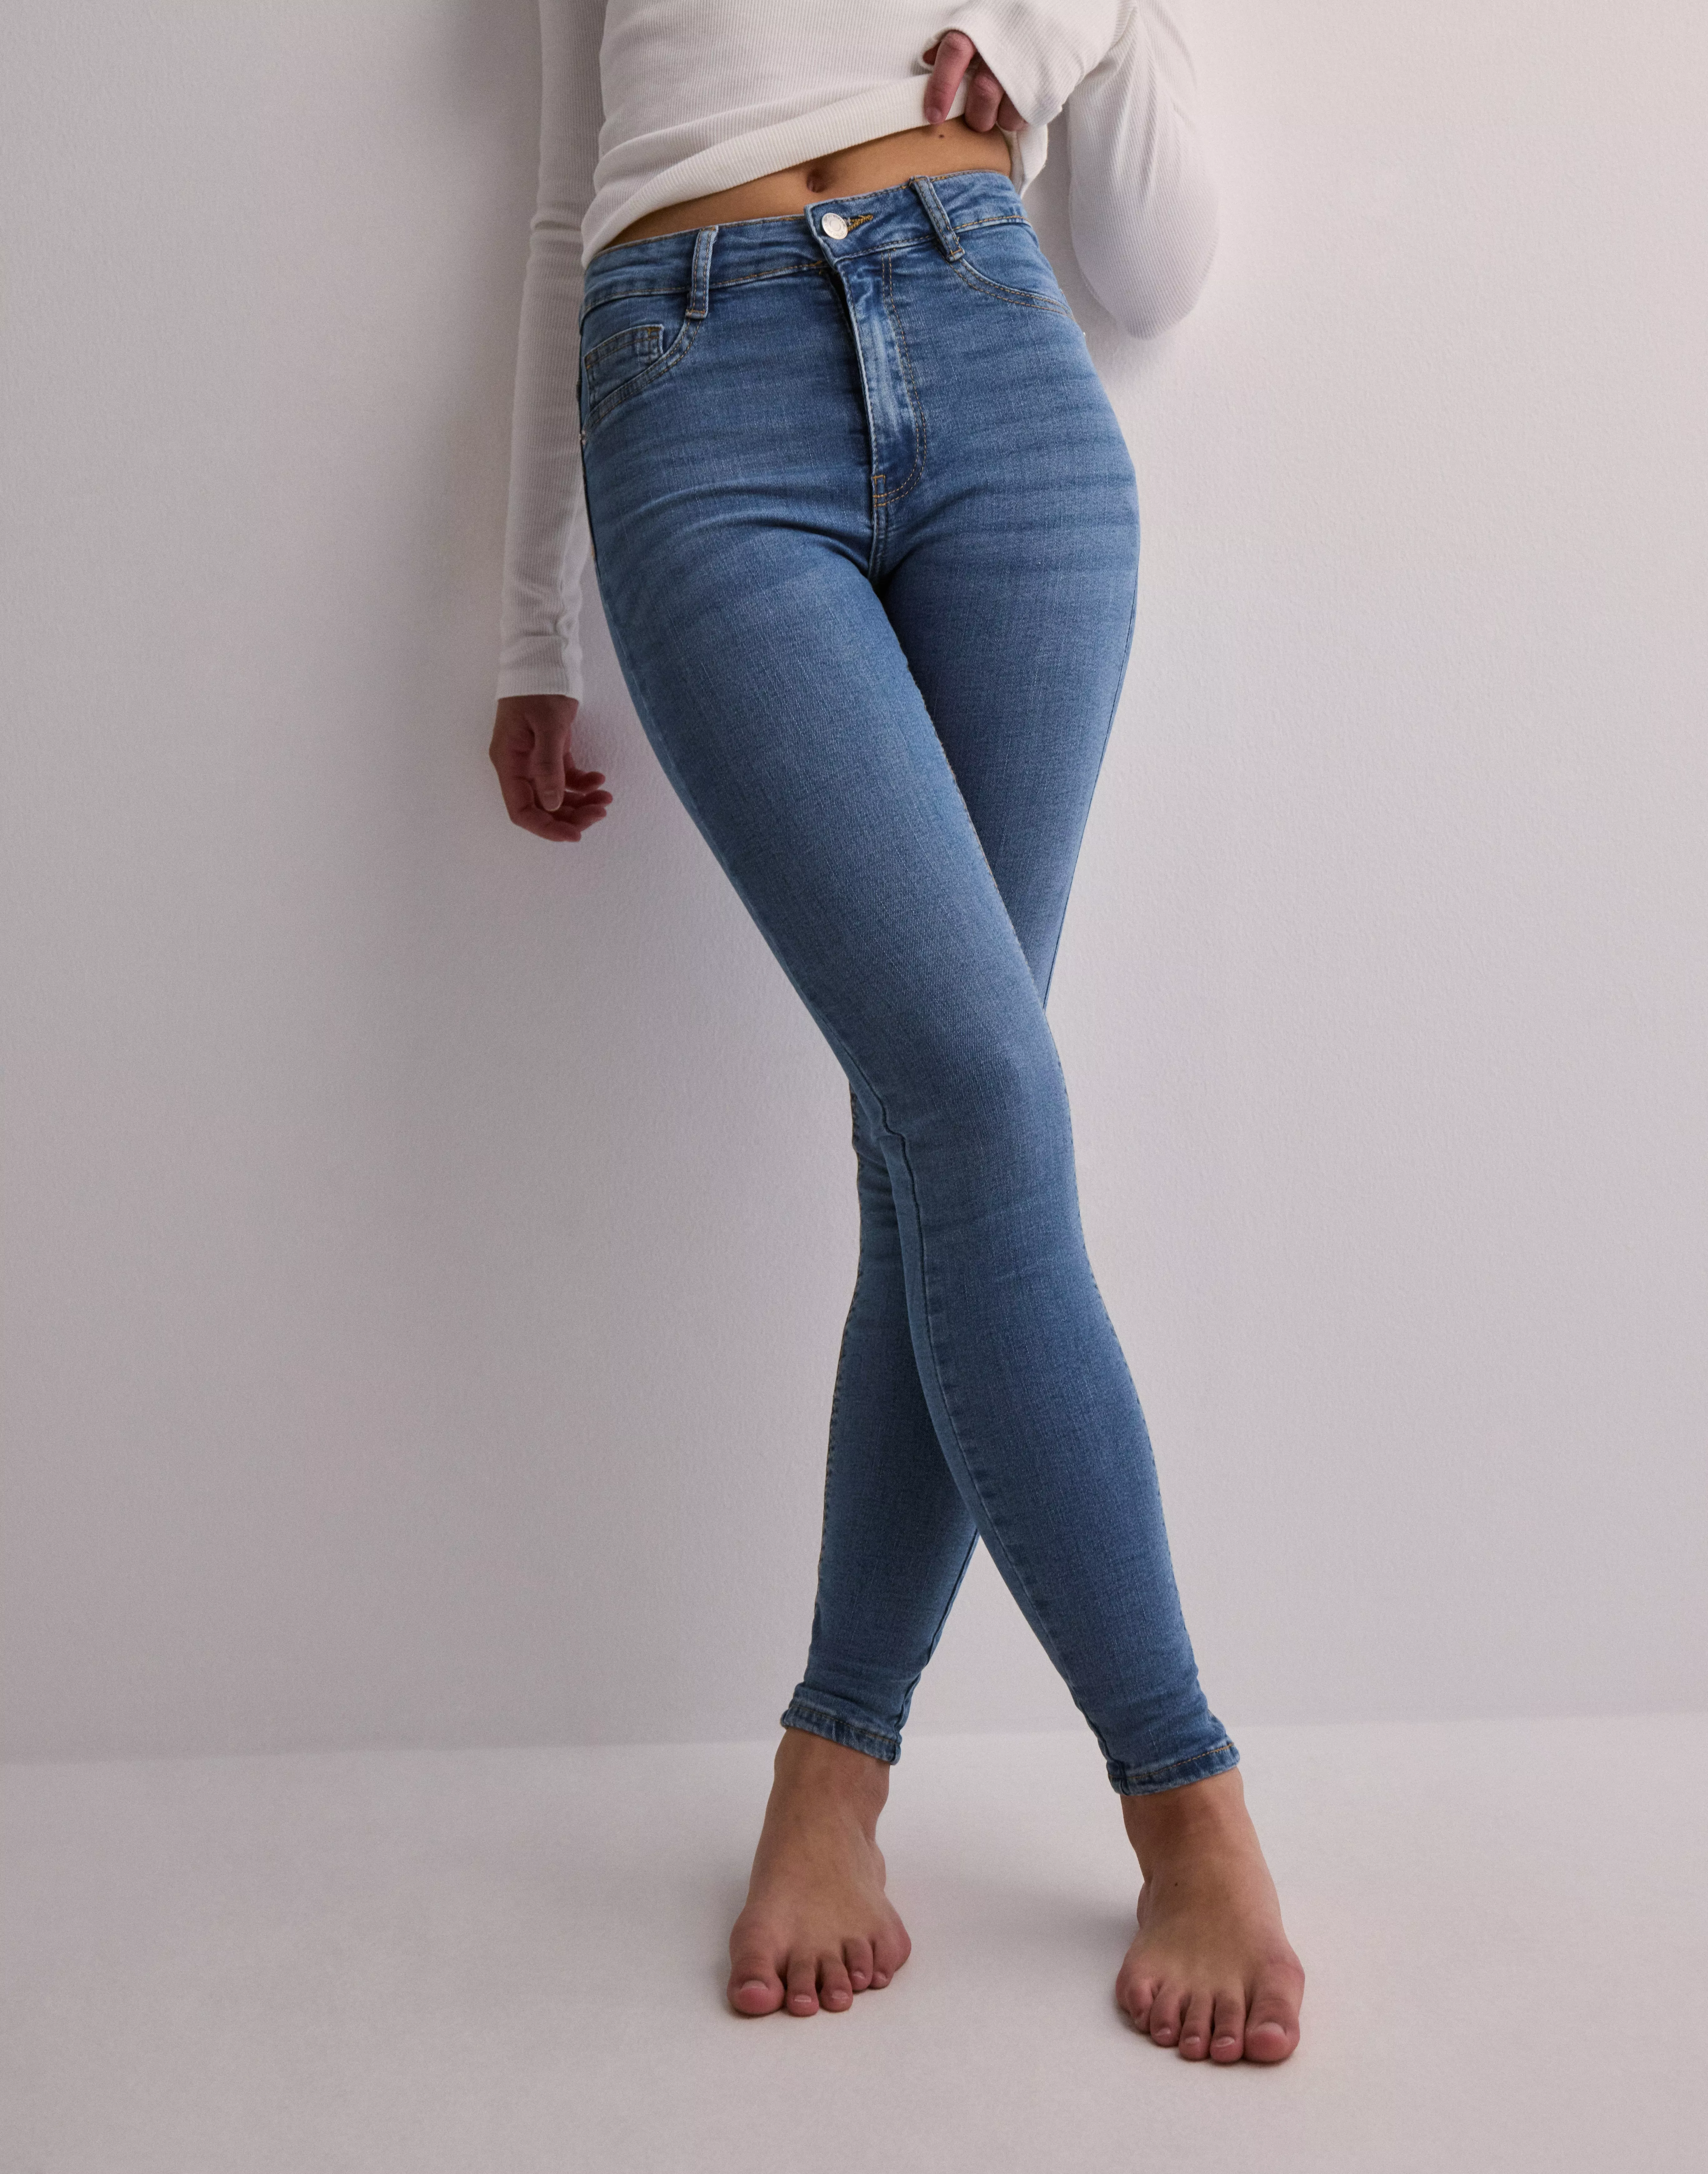 Køb Gina Tricot Molly High Waist Jeans - Blue | Nelly.com